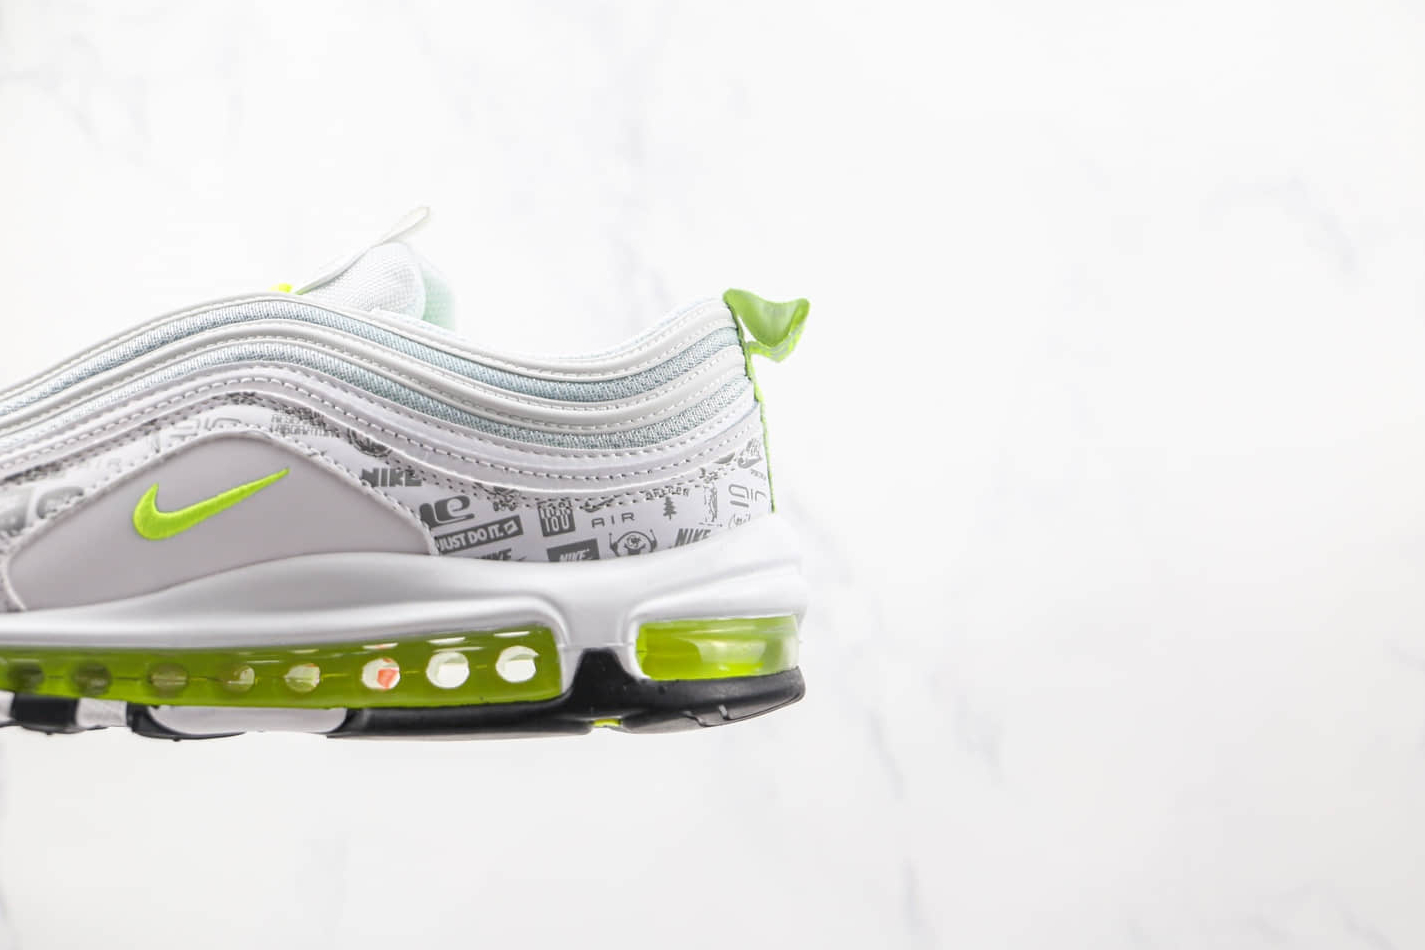 Nike Air Max 97 'Reflective Logo' DH0006-100 - Stylish and Iconic Sneakers